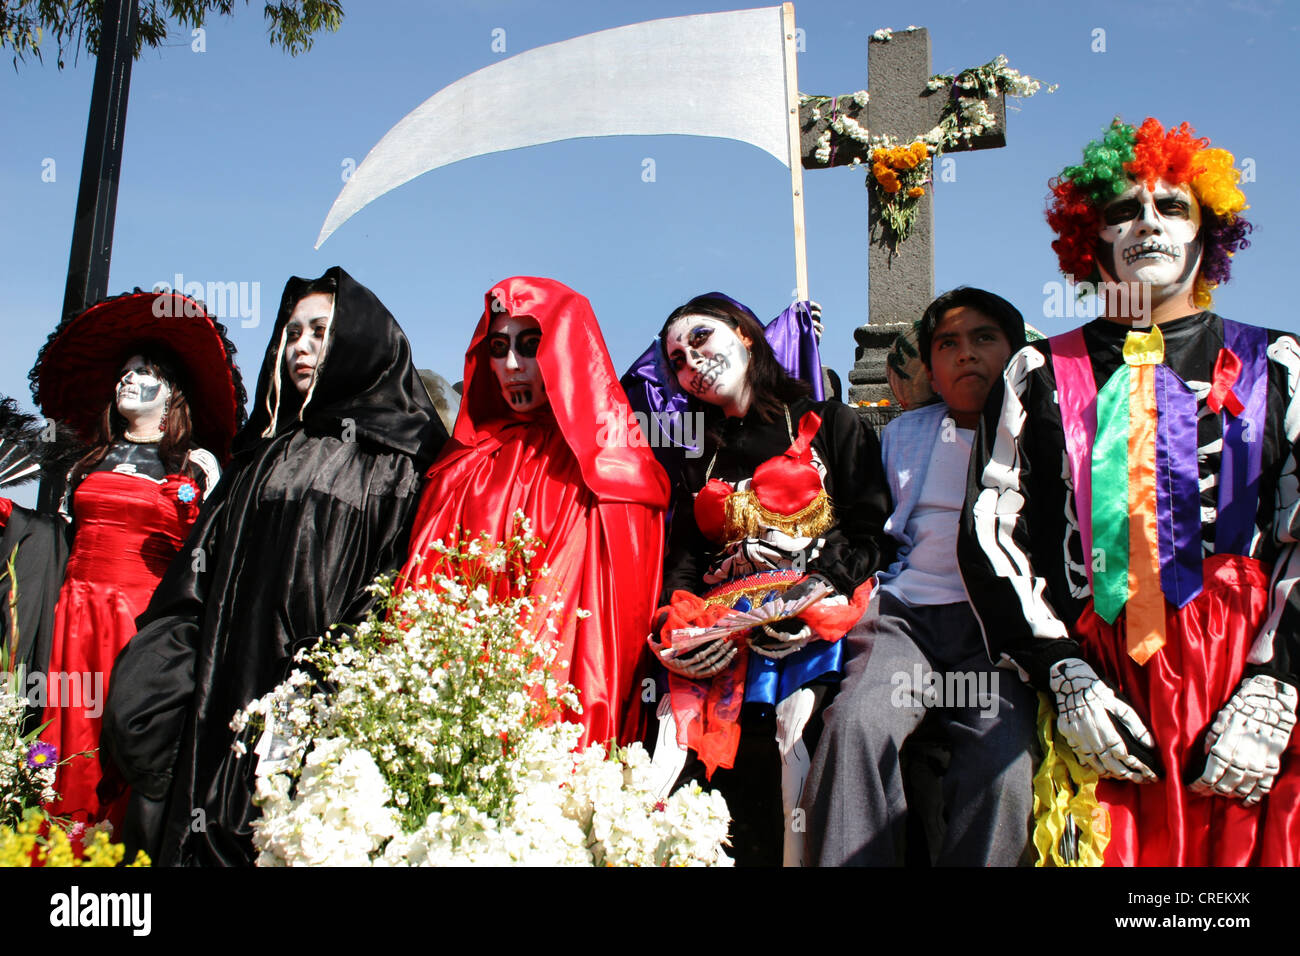 death cult at cemetery in Mexico City, Mexico, Mexiko Stadt Stock Photo